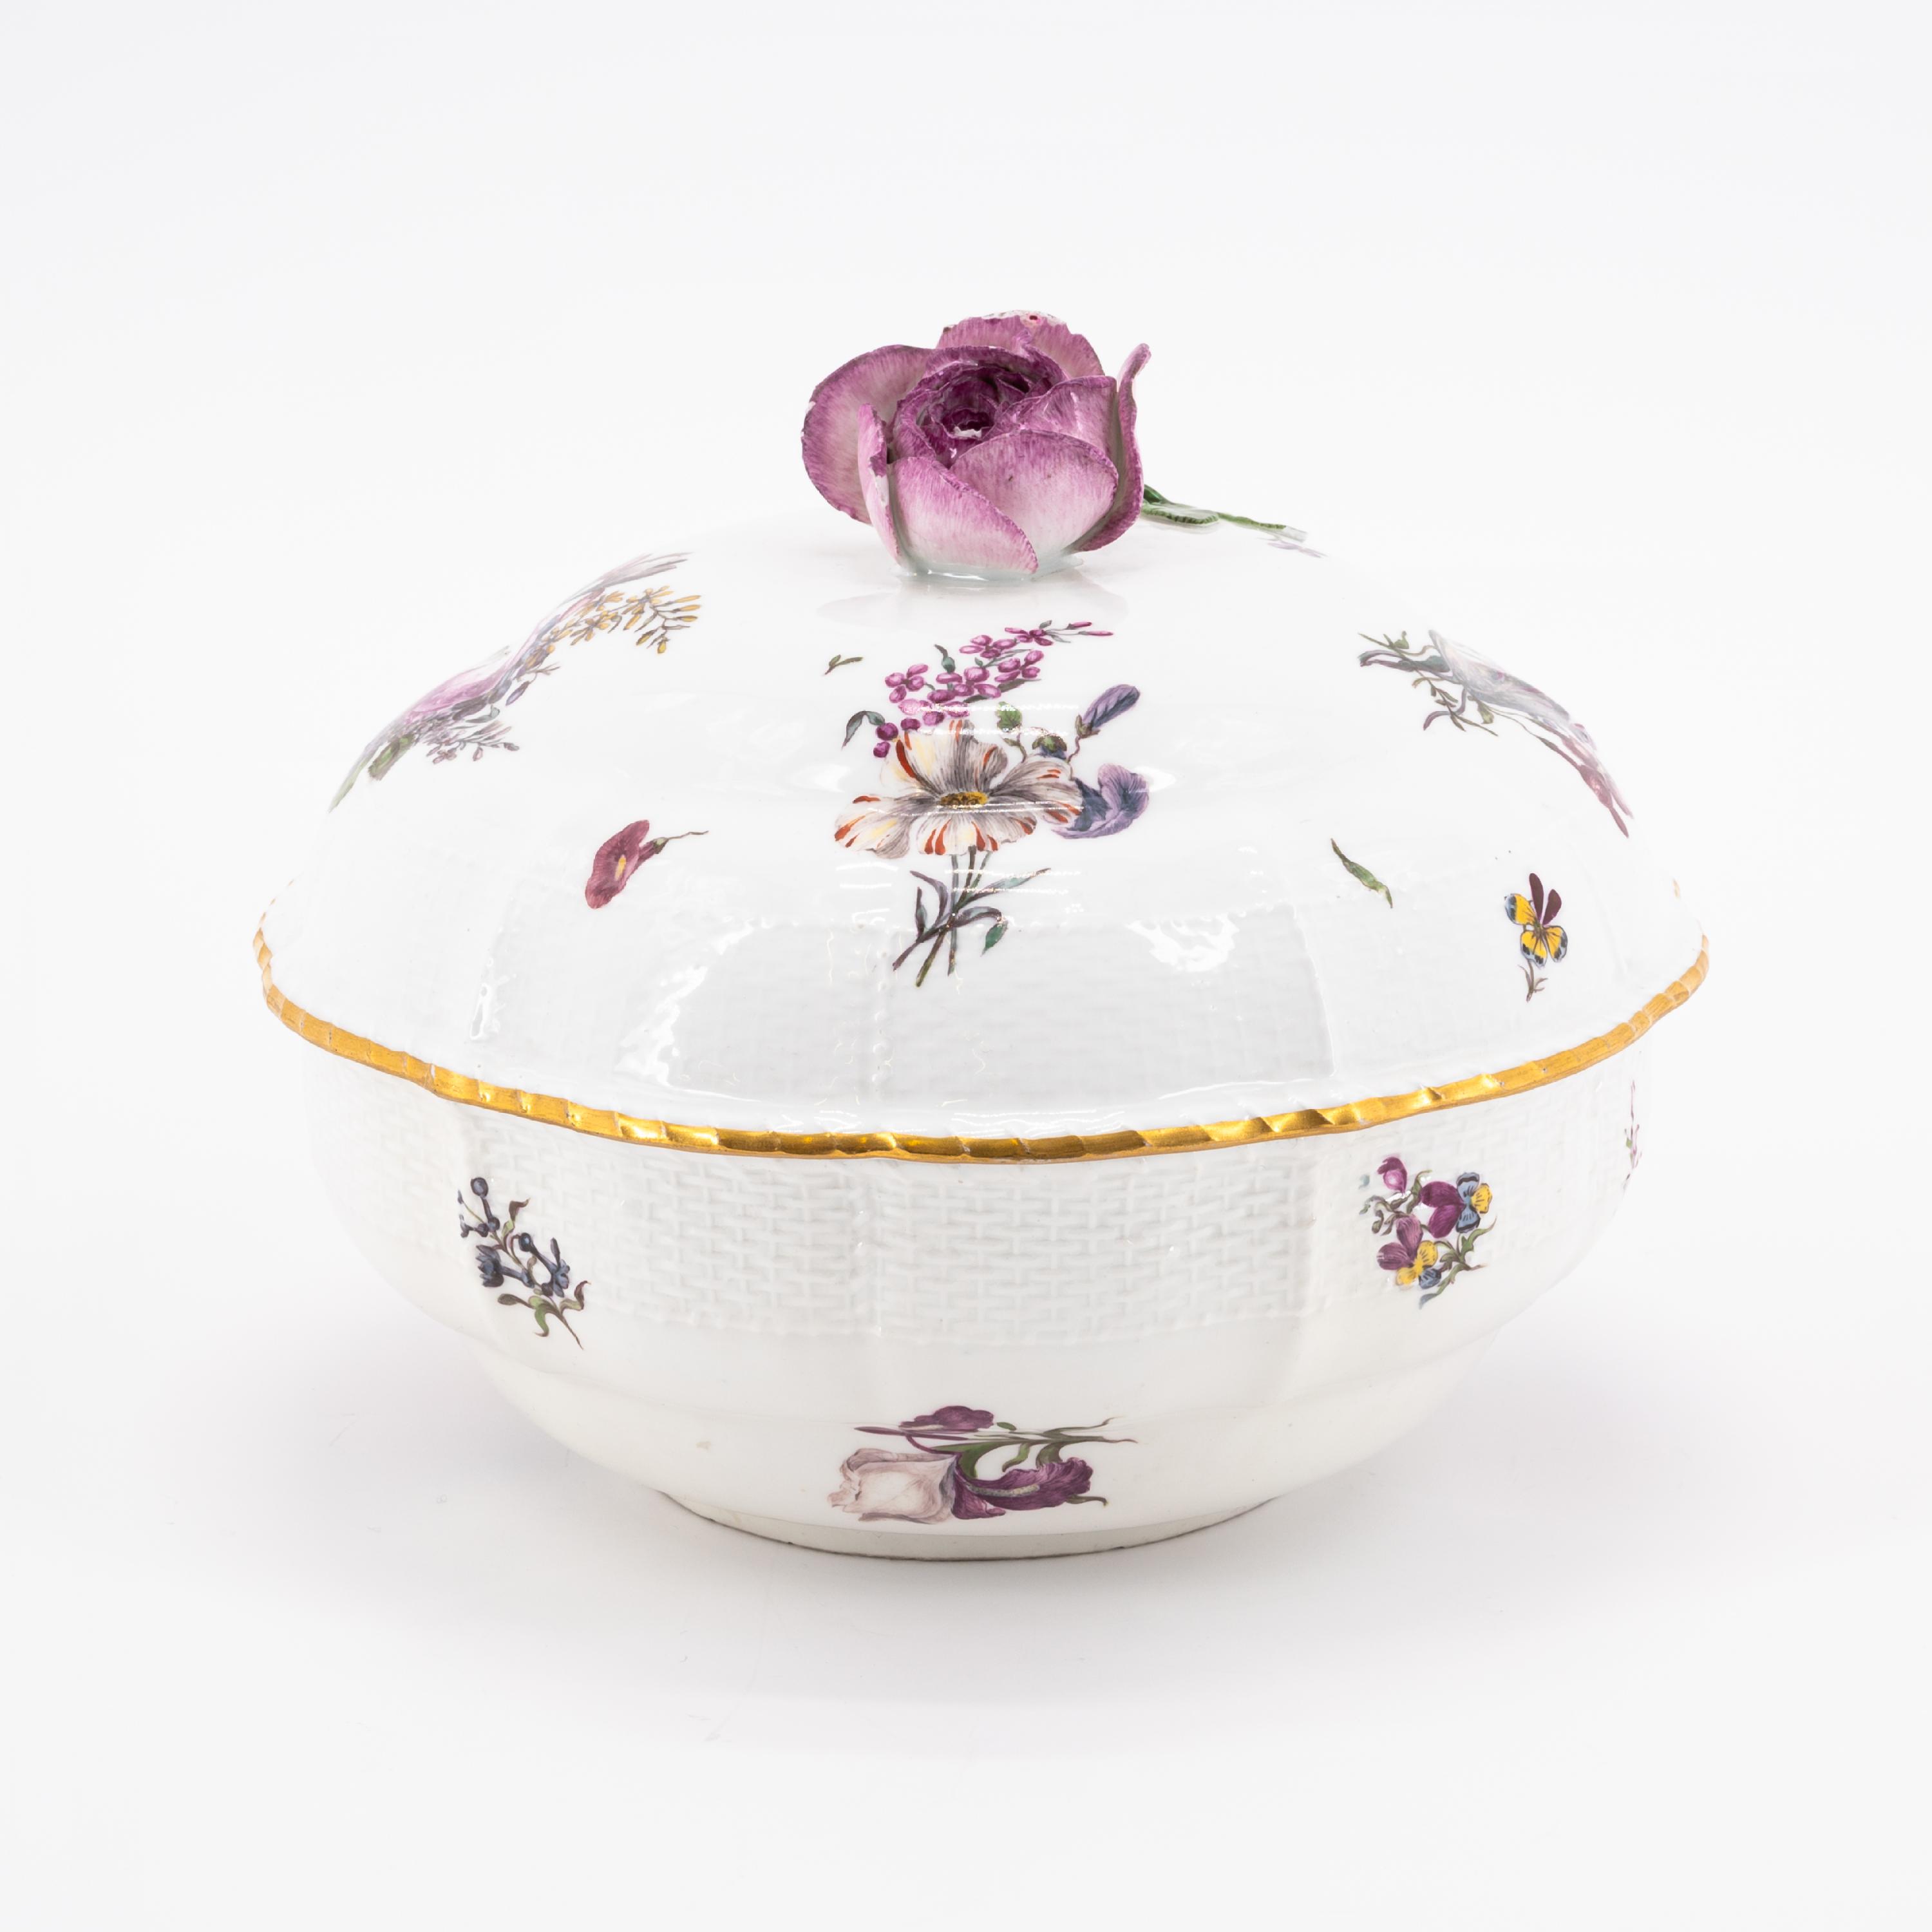 LARGE PORCELAIN LIDDED BOWL WITH FLOWER KNOB, SMALL TEA POT WITH WOODCUT FLOWERS AND CUP WITH SAUCER - Image 4 of 18